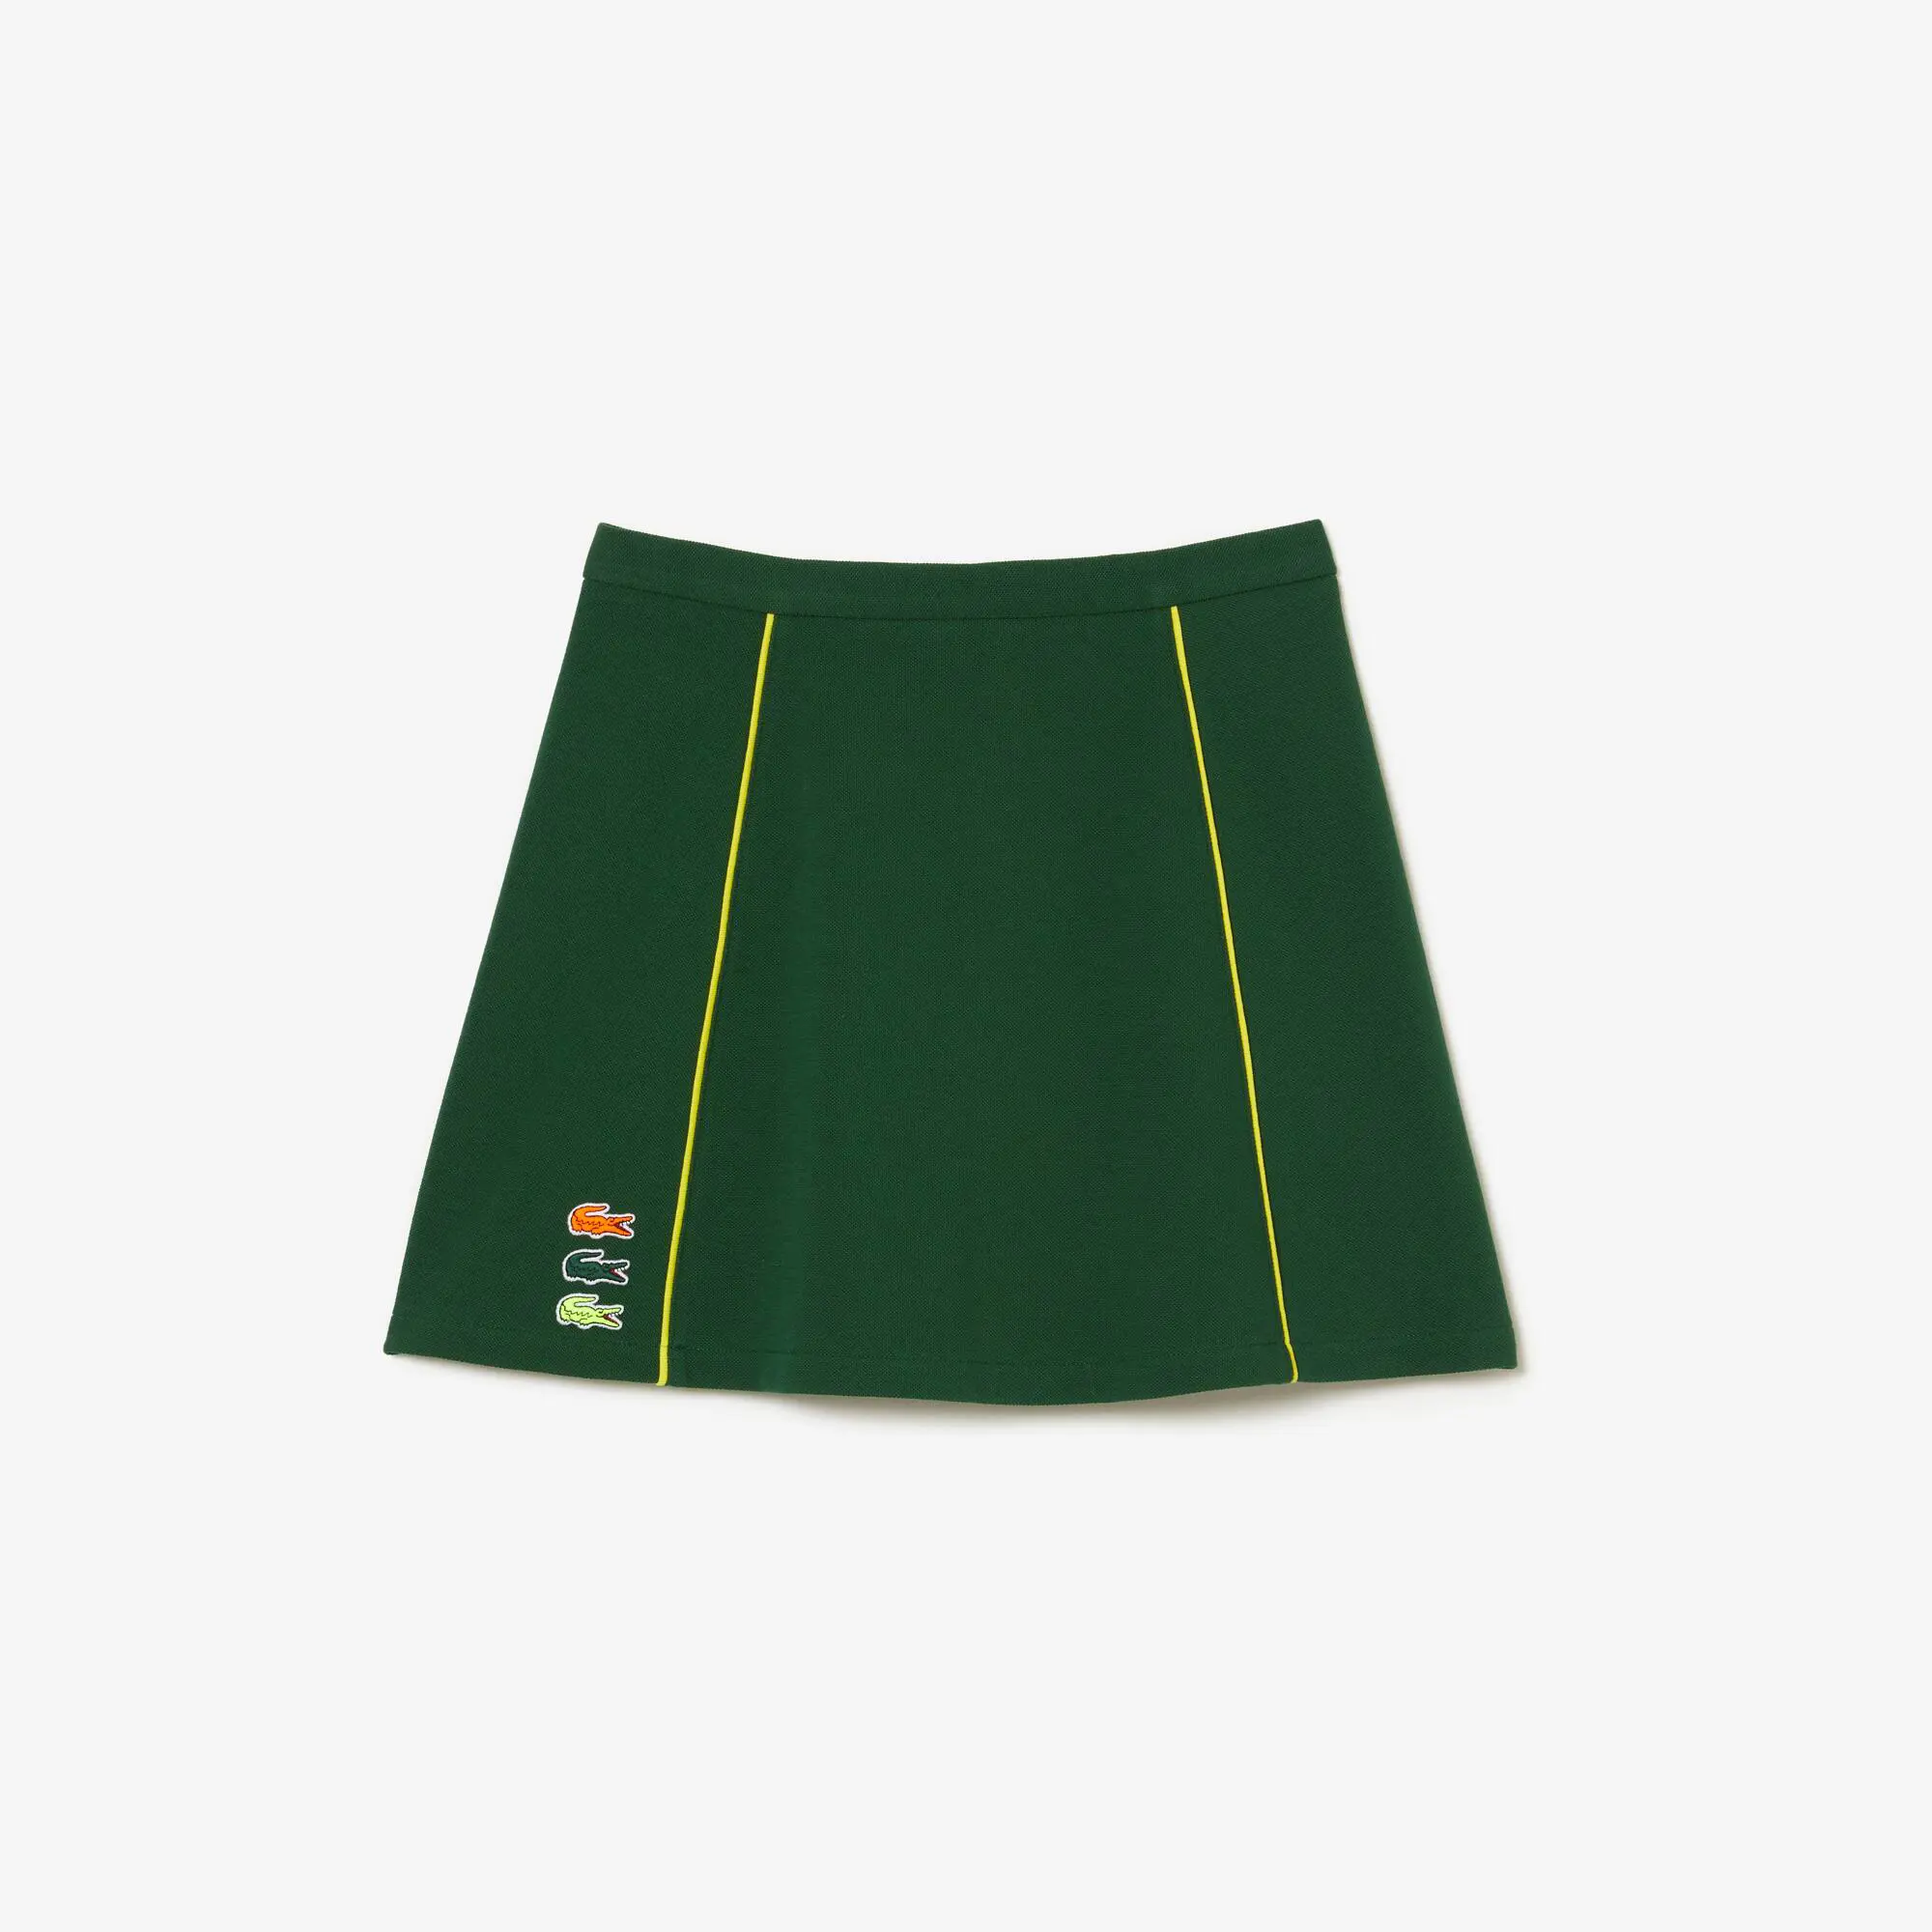 Lacoste Women’s Lacoste Organic Cotton French Made Skirt. 2